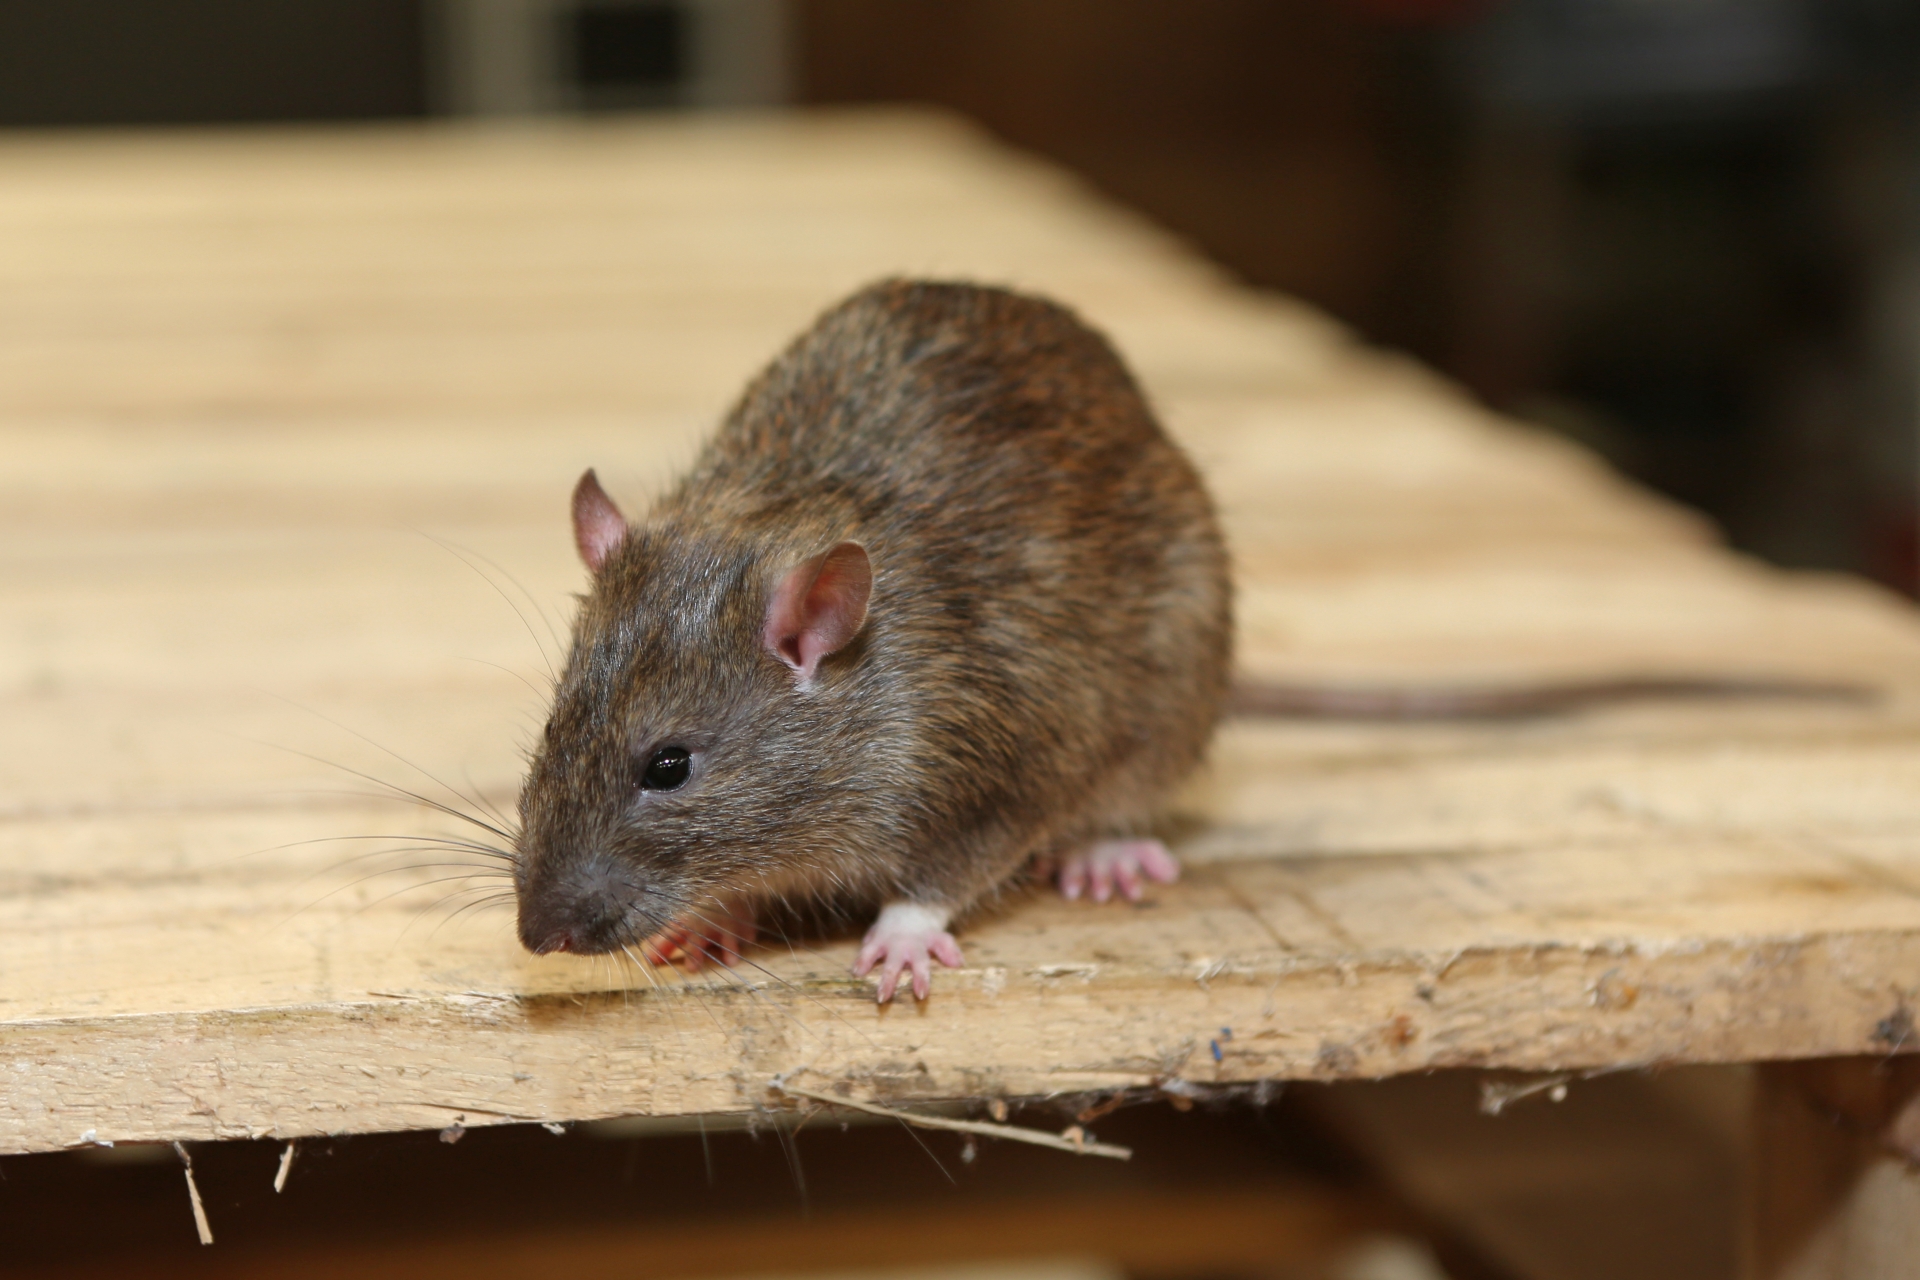 Rat extermination, Pest Control in Abbots Langley, Bedmond, WD5. Call Now 020 8166 9746